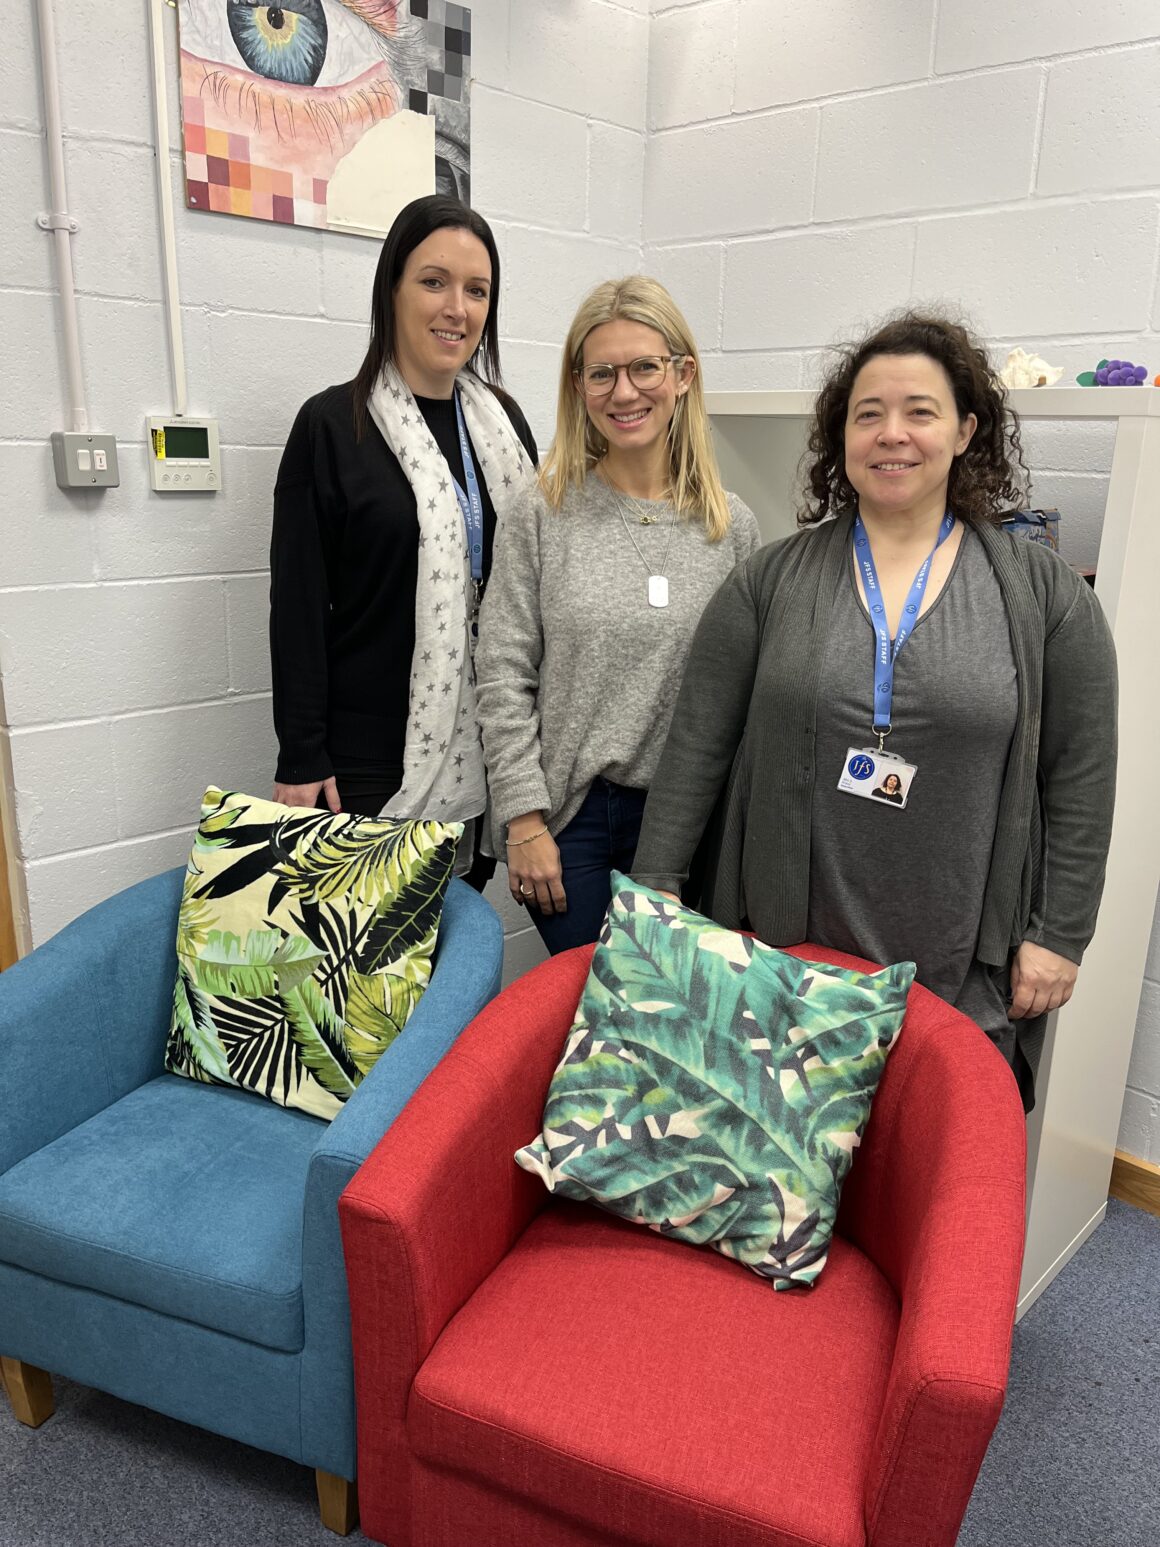 Colourful Additions for Wellbeing Department